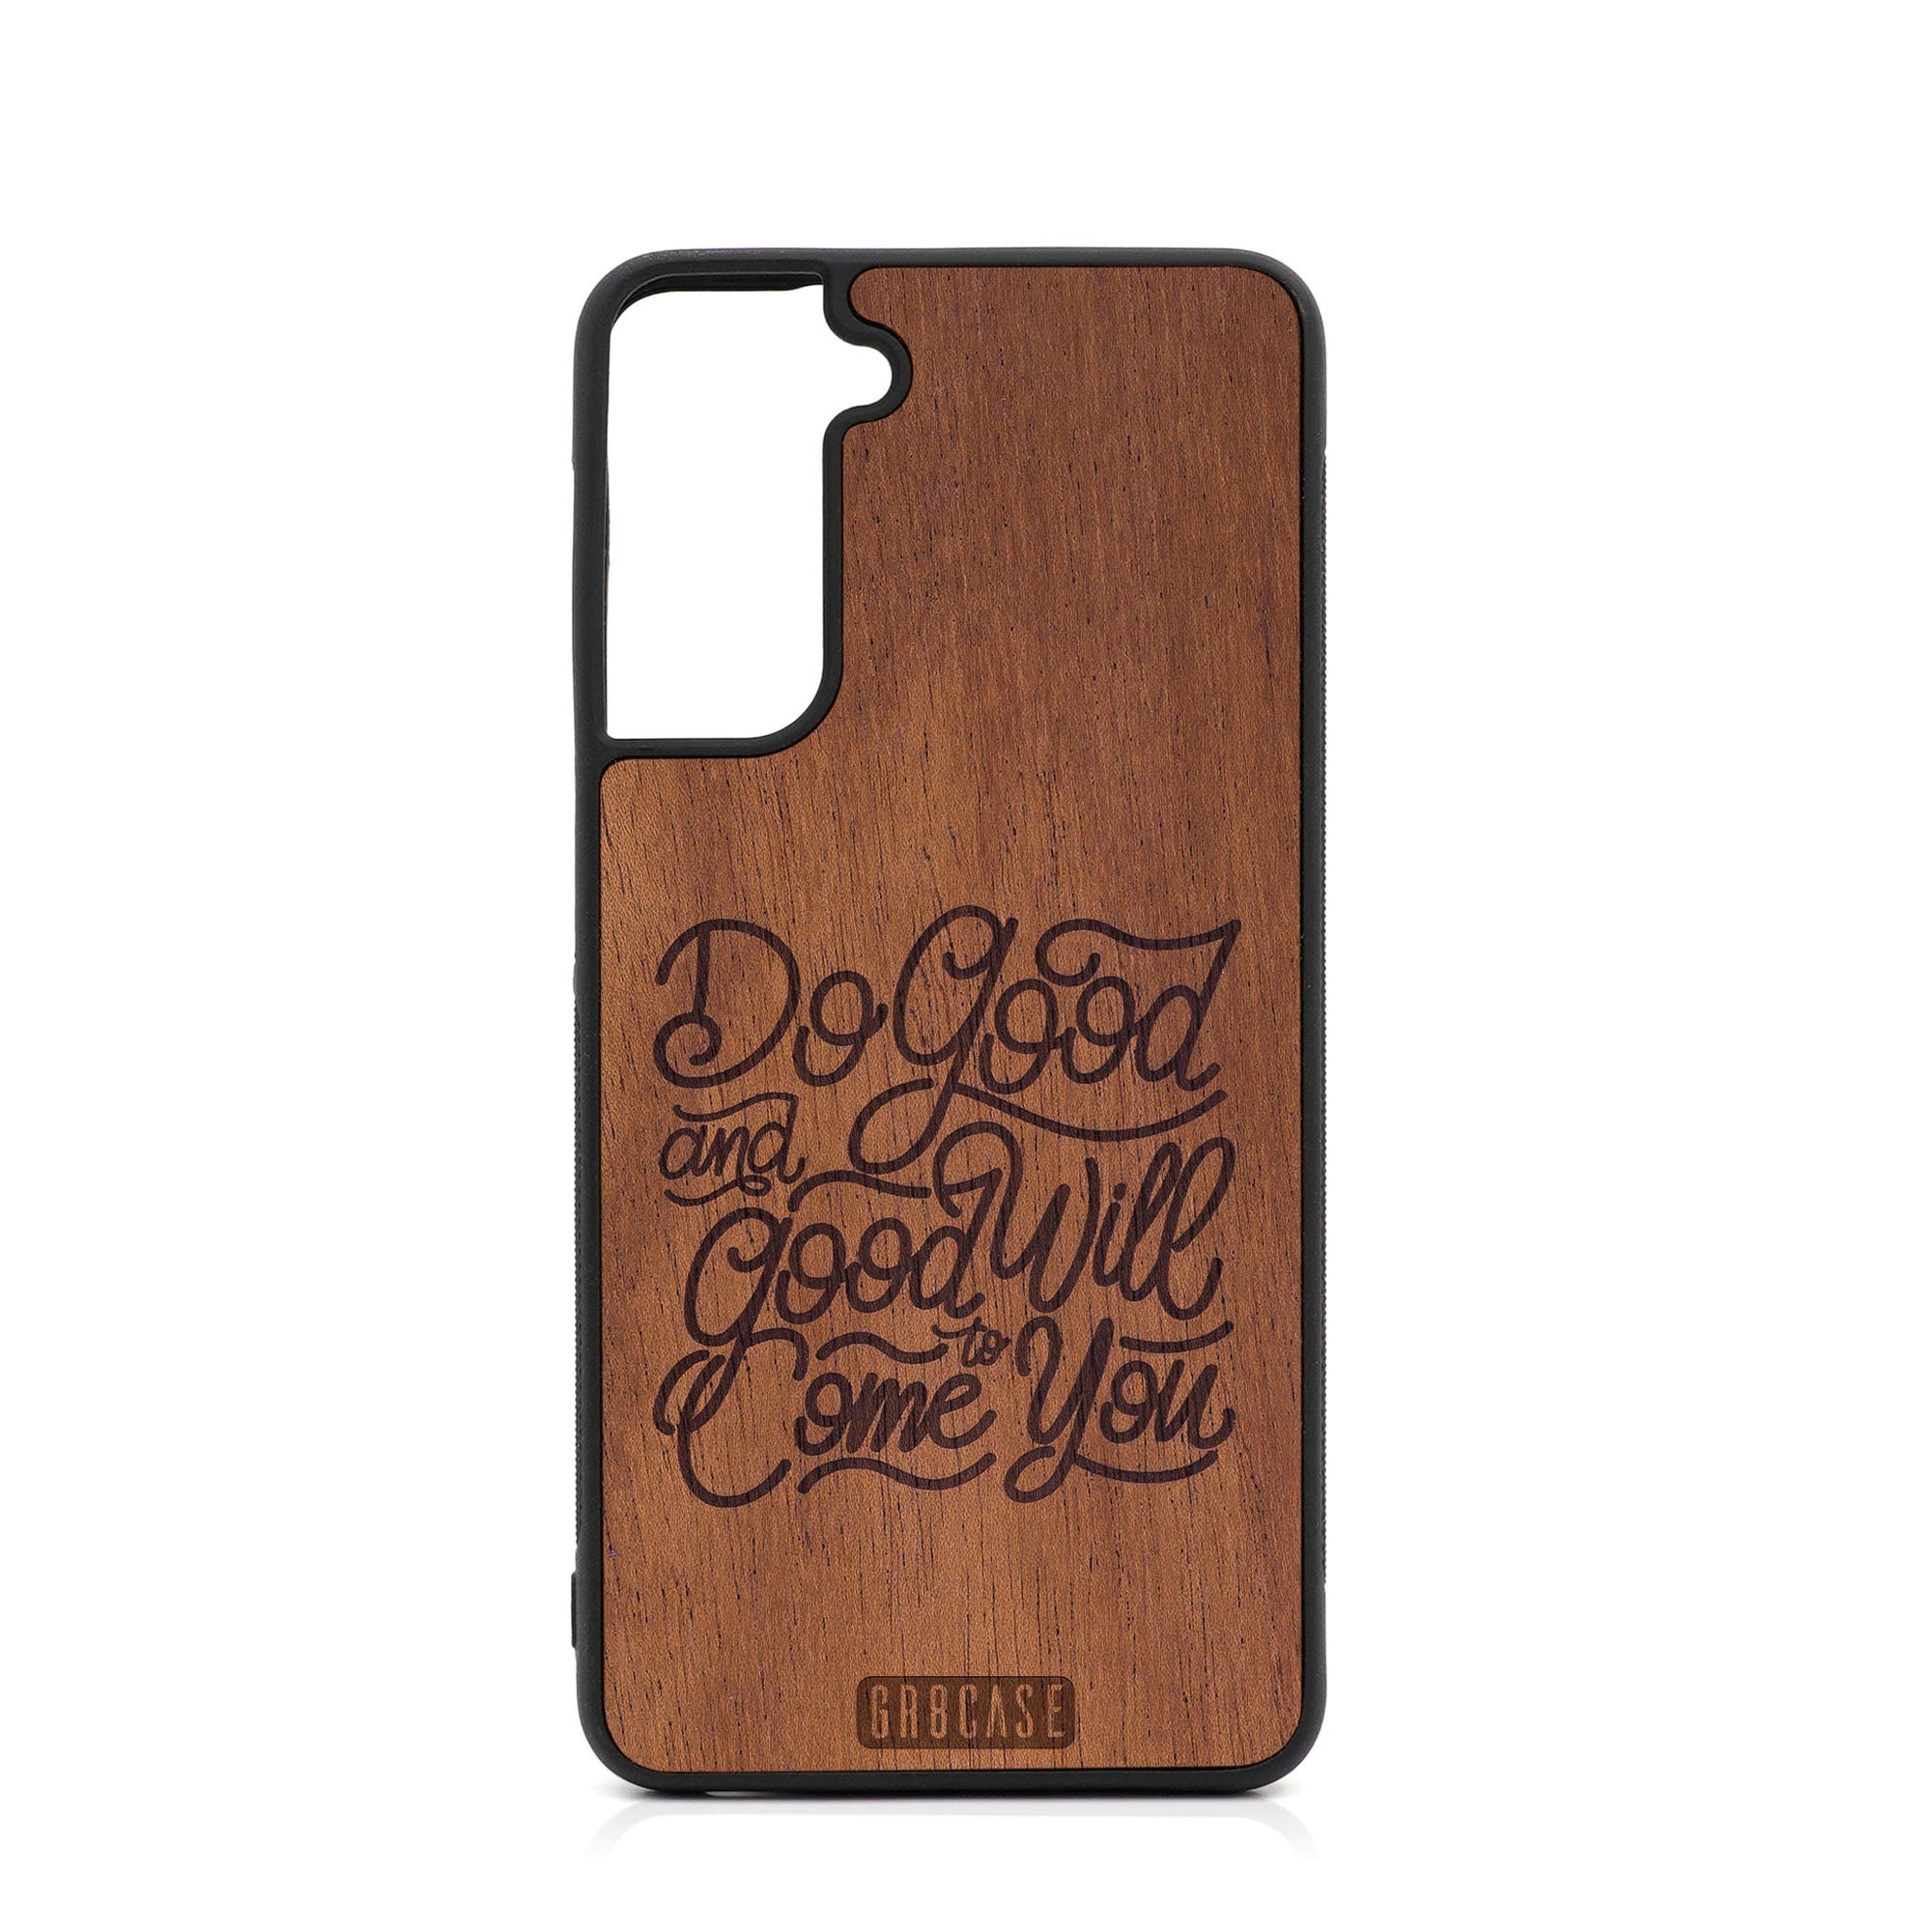 Do Good And Good Will Come To You Design Wood Case For Samsung Galaxy S22 Plus